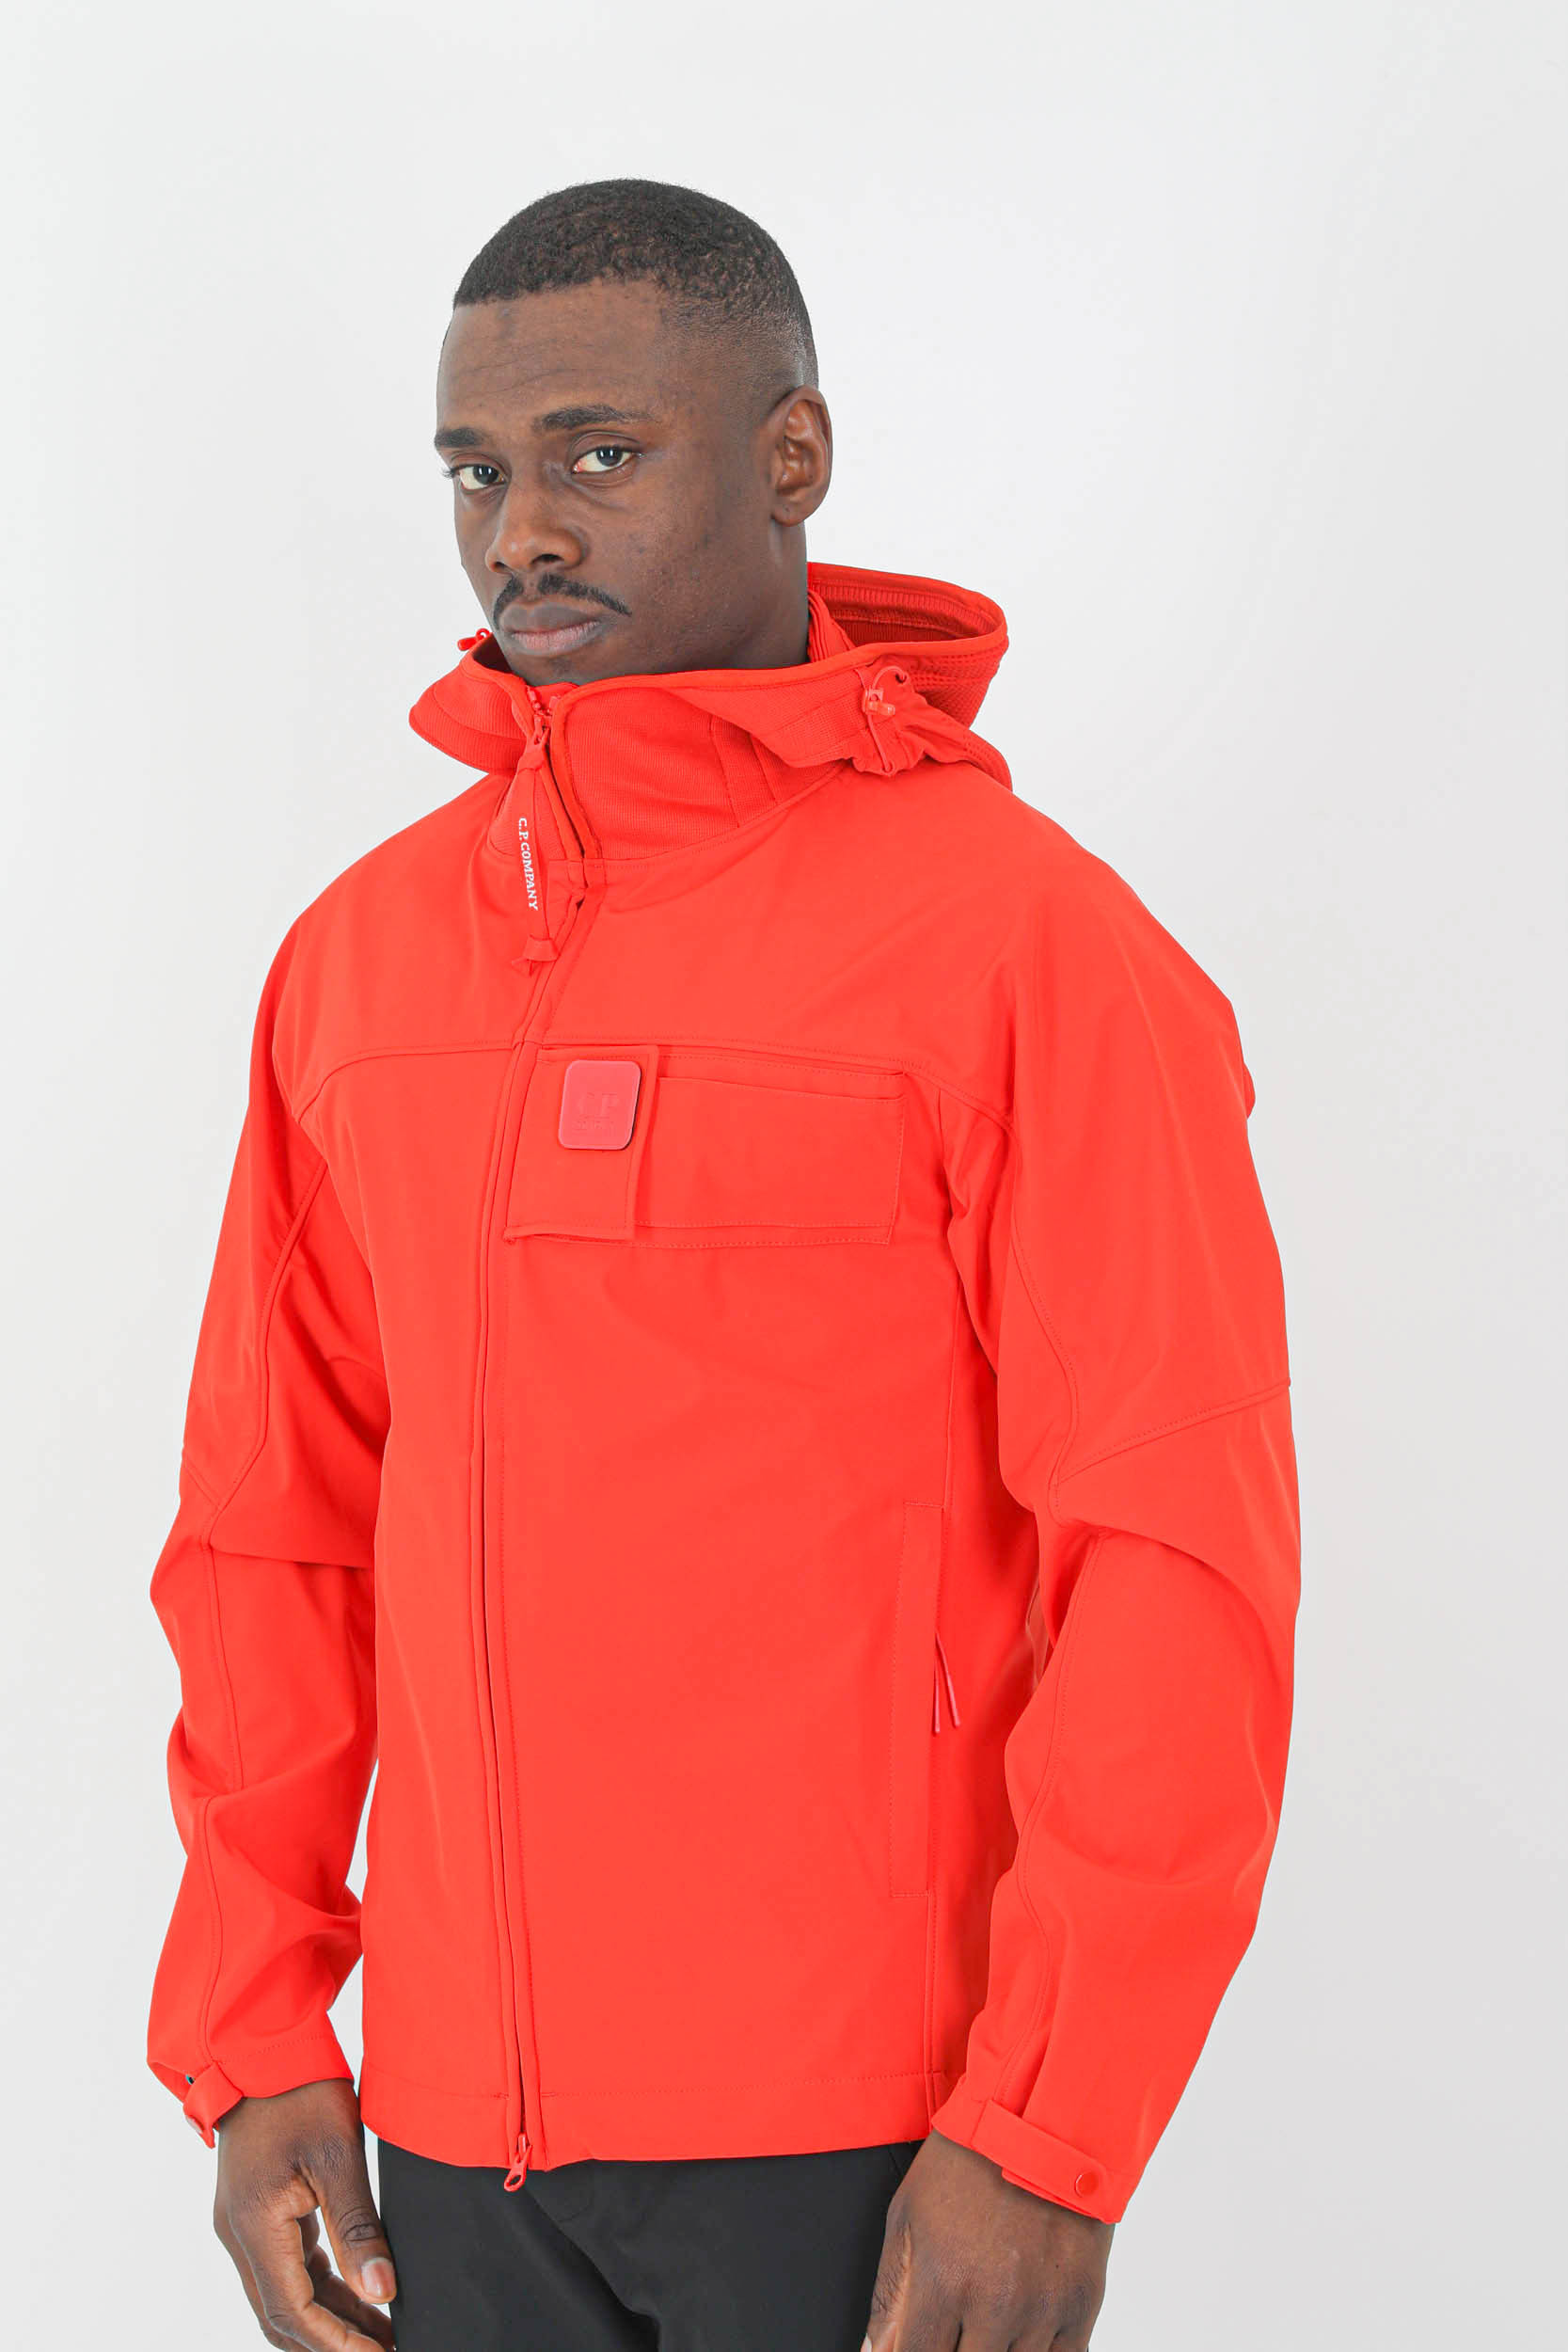 BLOUSON SOFT SHELL R CP COMPANY ROUGE W064A-455